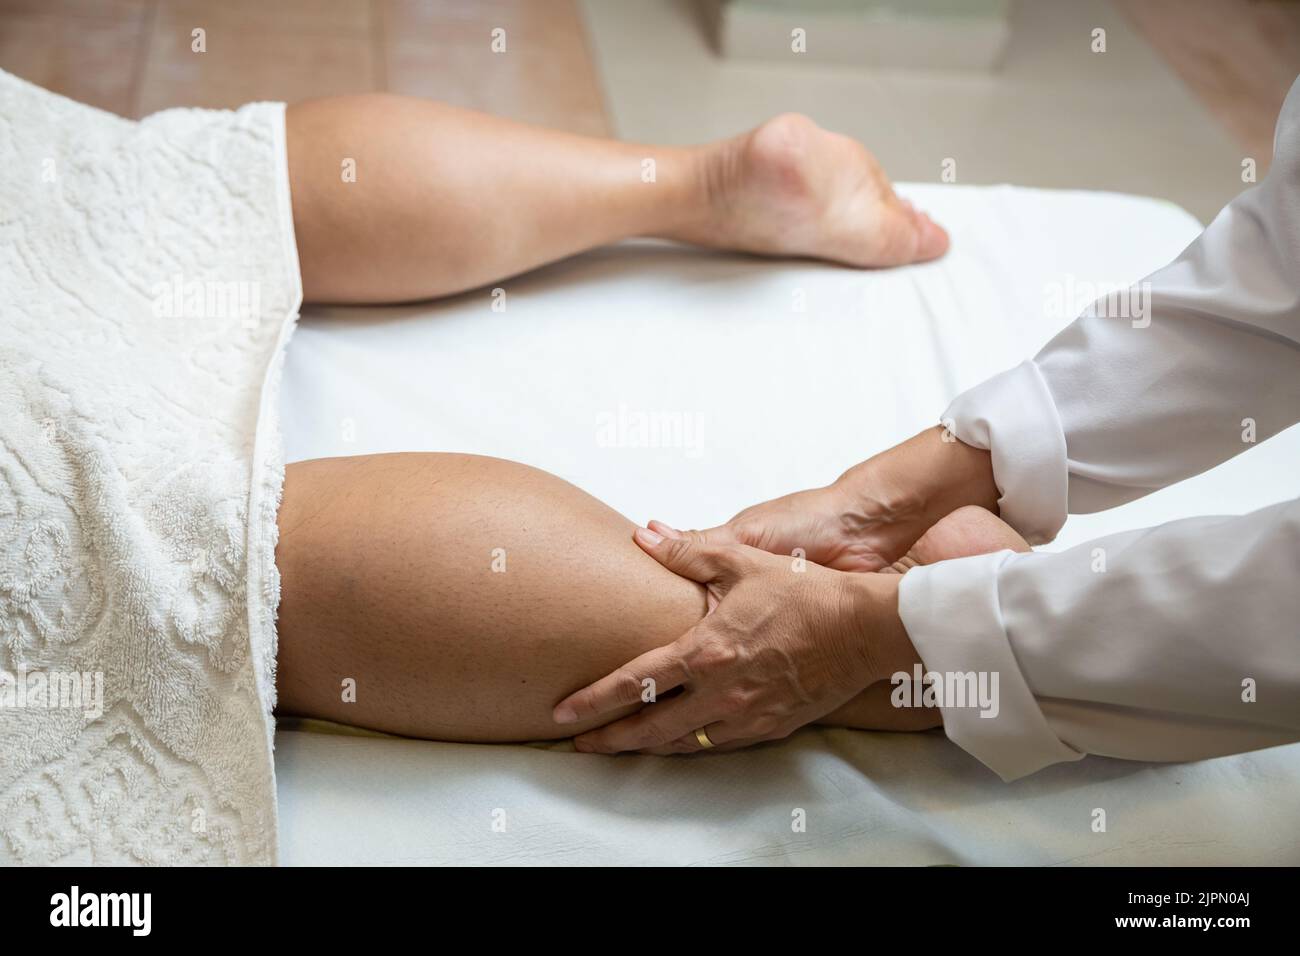 Goiânia, Goias, Brazil – July 18, 2022: A therapist dressed in white giving a leg massage to a patient lying on a stretcher. Stock Photo